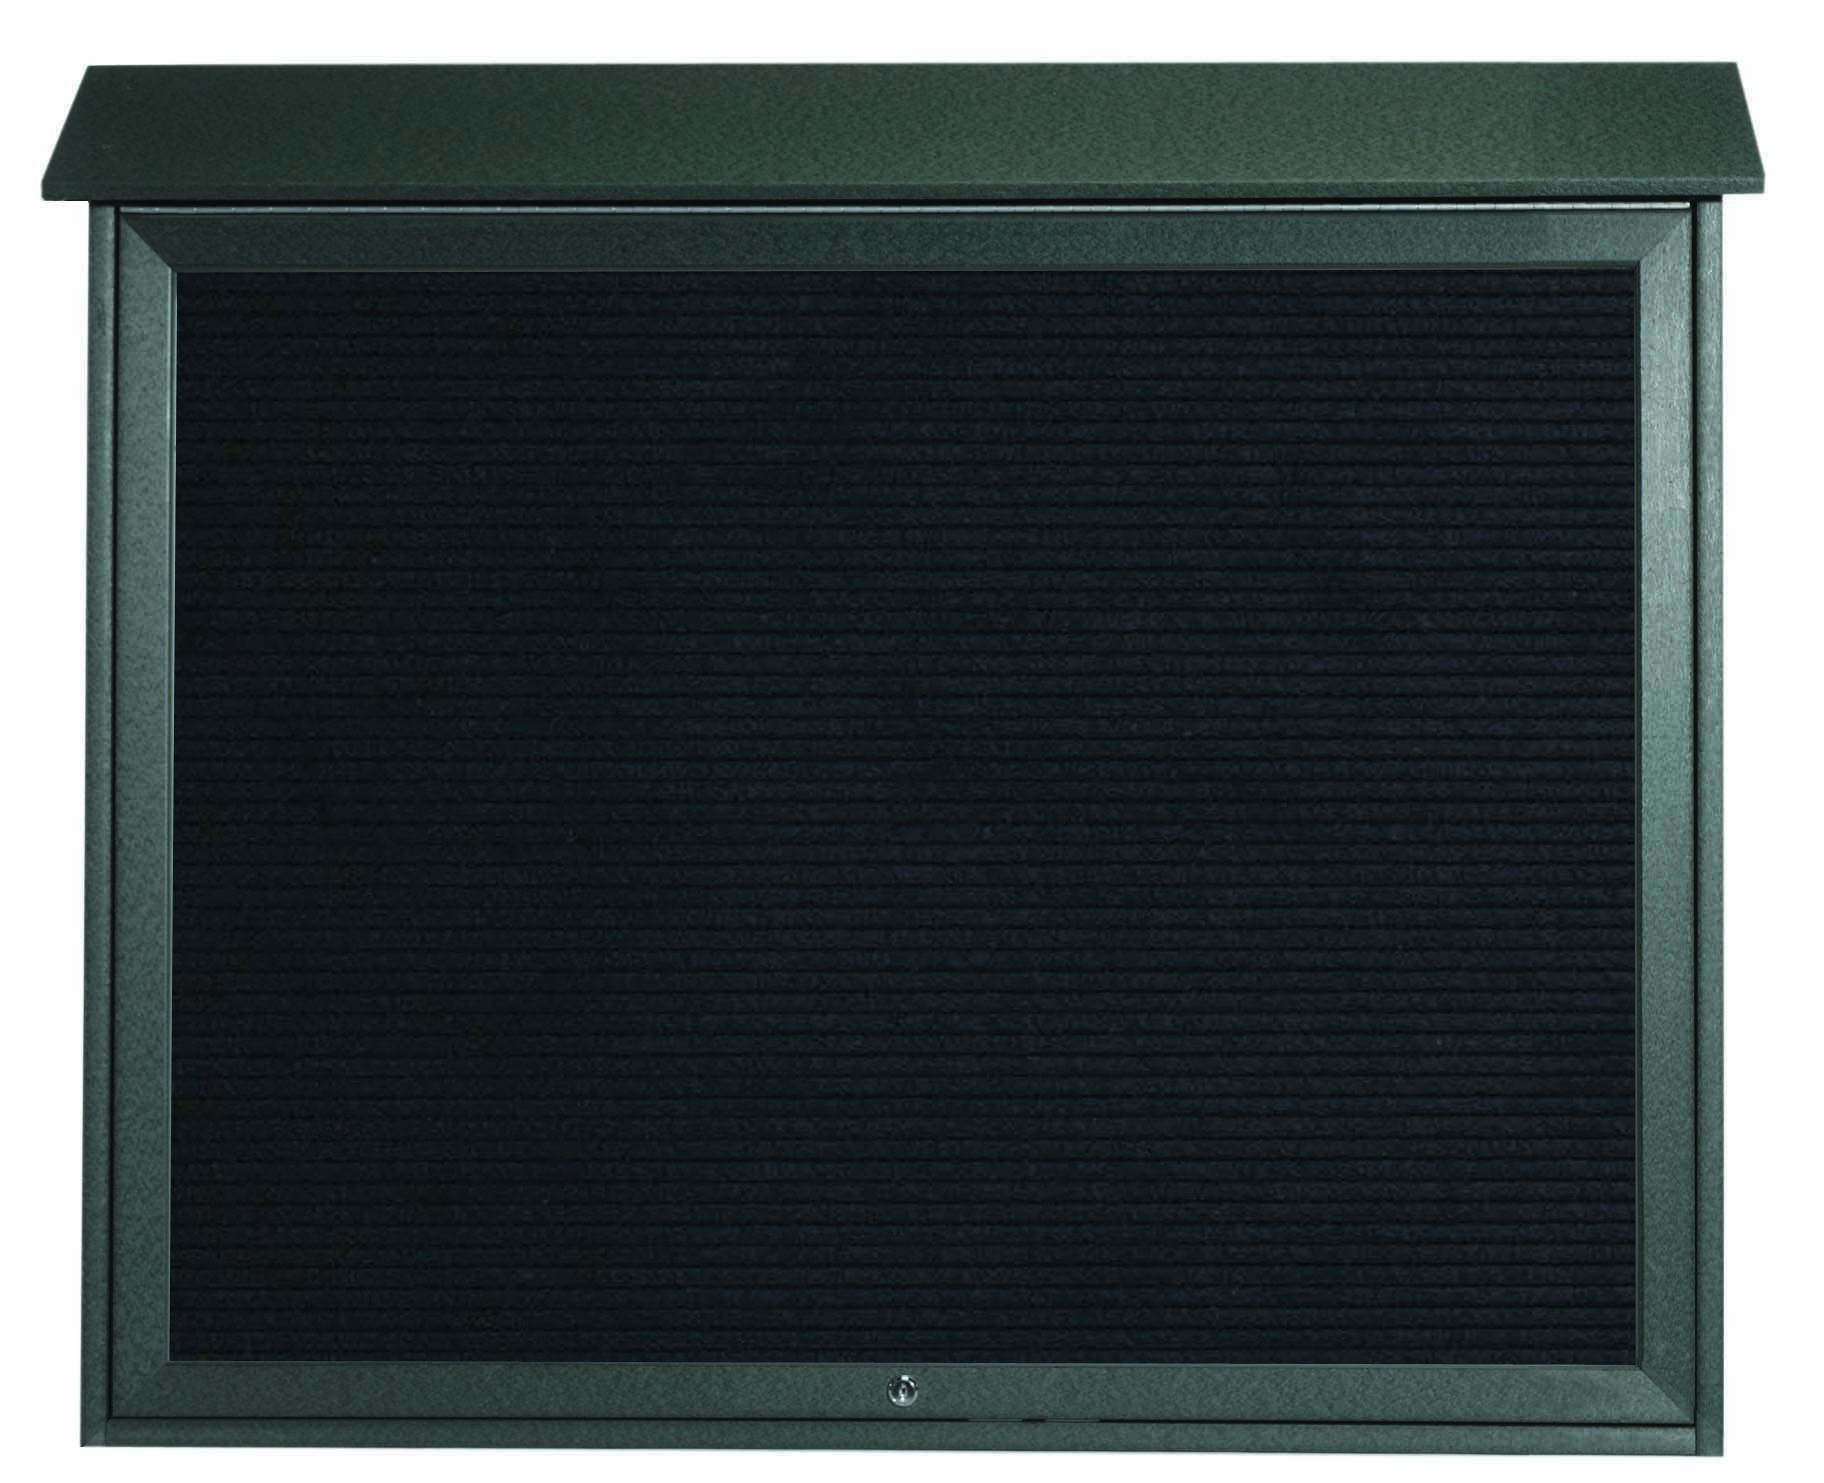 Aarco Products PLD3645TL-4 Green Top Hinged Single Door Plastic Lumber Message Center with Letter Board, 45"W x 36"H 